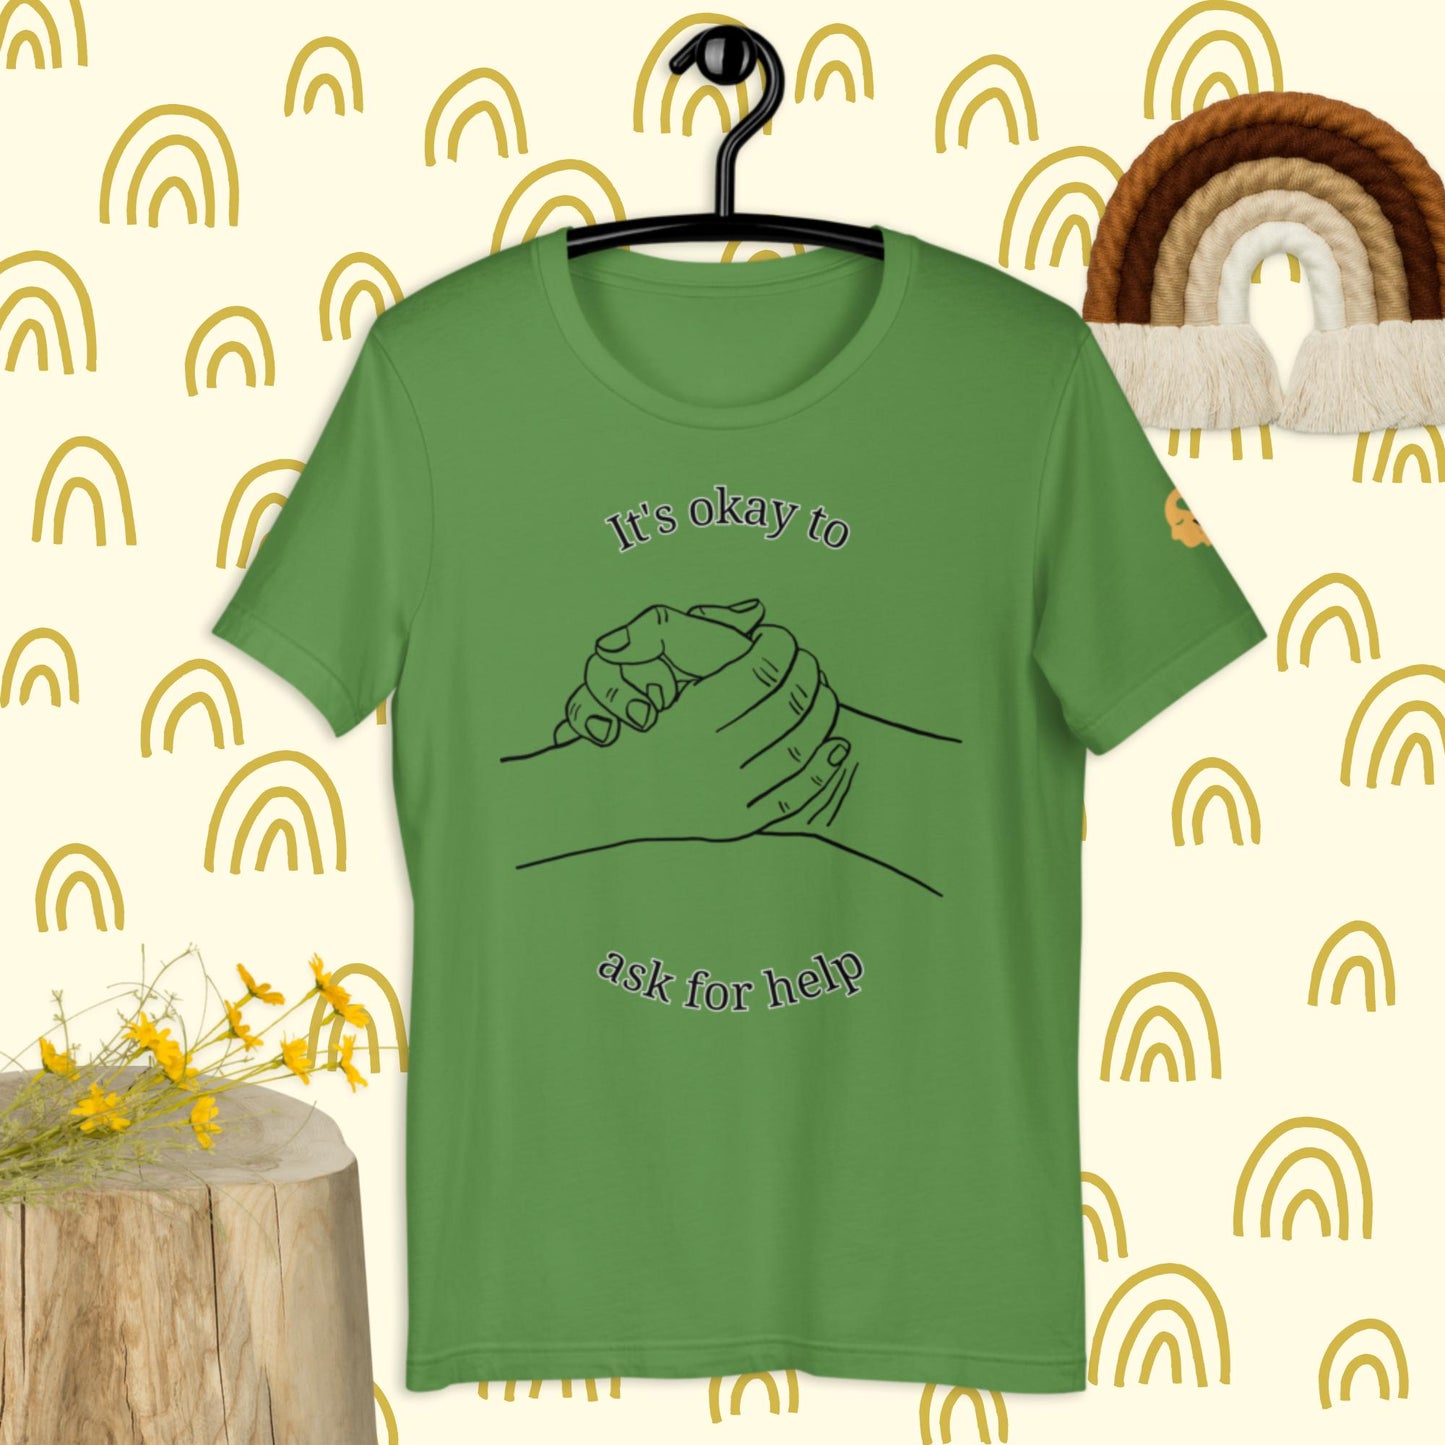 It's okay to ask for help t-shirt